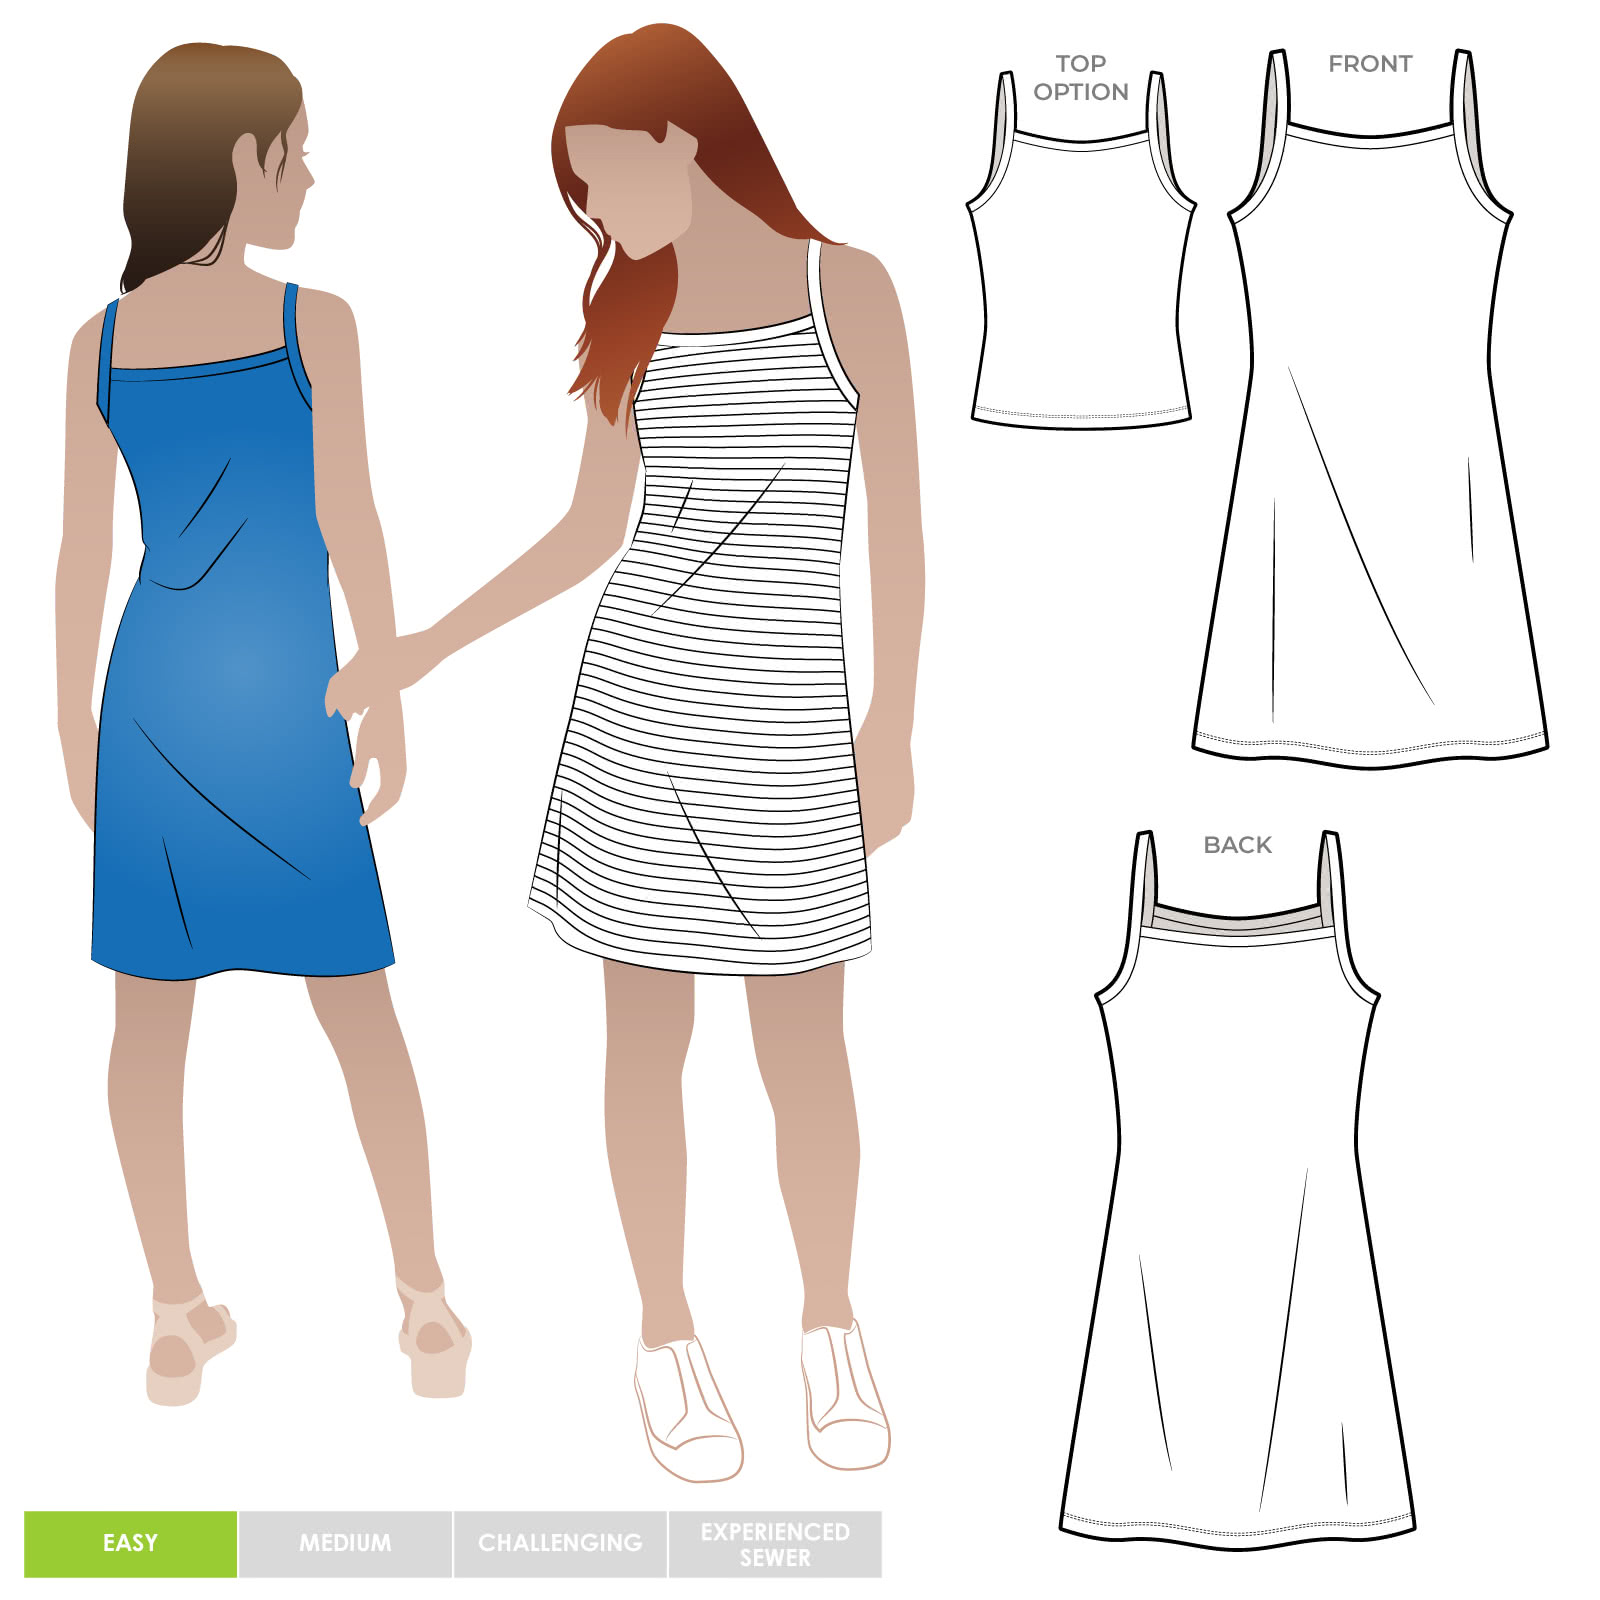 Adele Teens Dress Top By Style Arc - Simple rib knit dress with thin straps and optional top pattern for teens 8-16